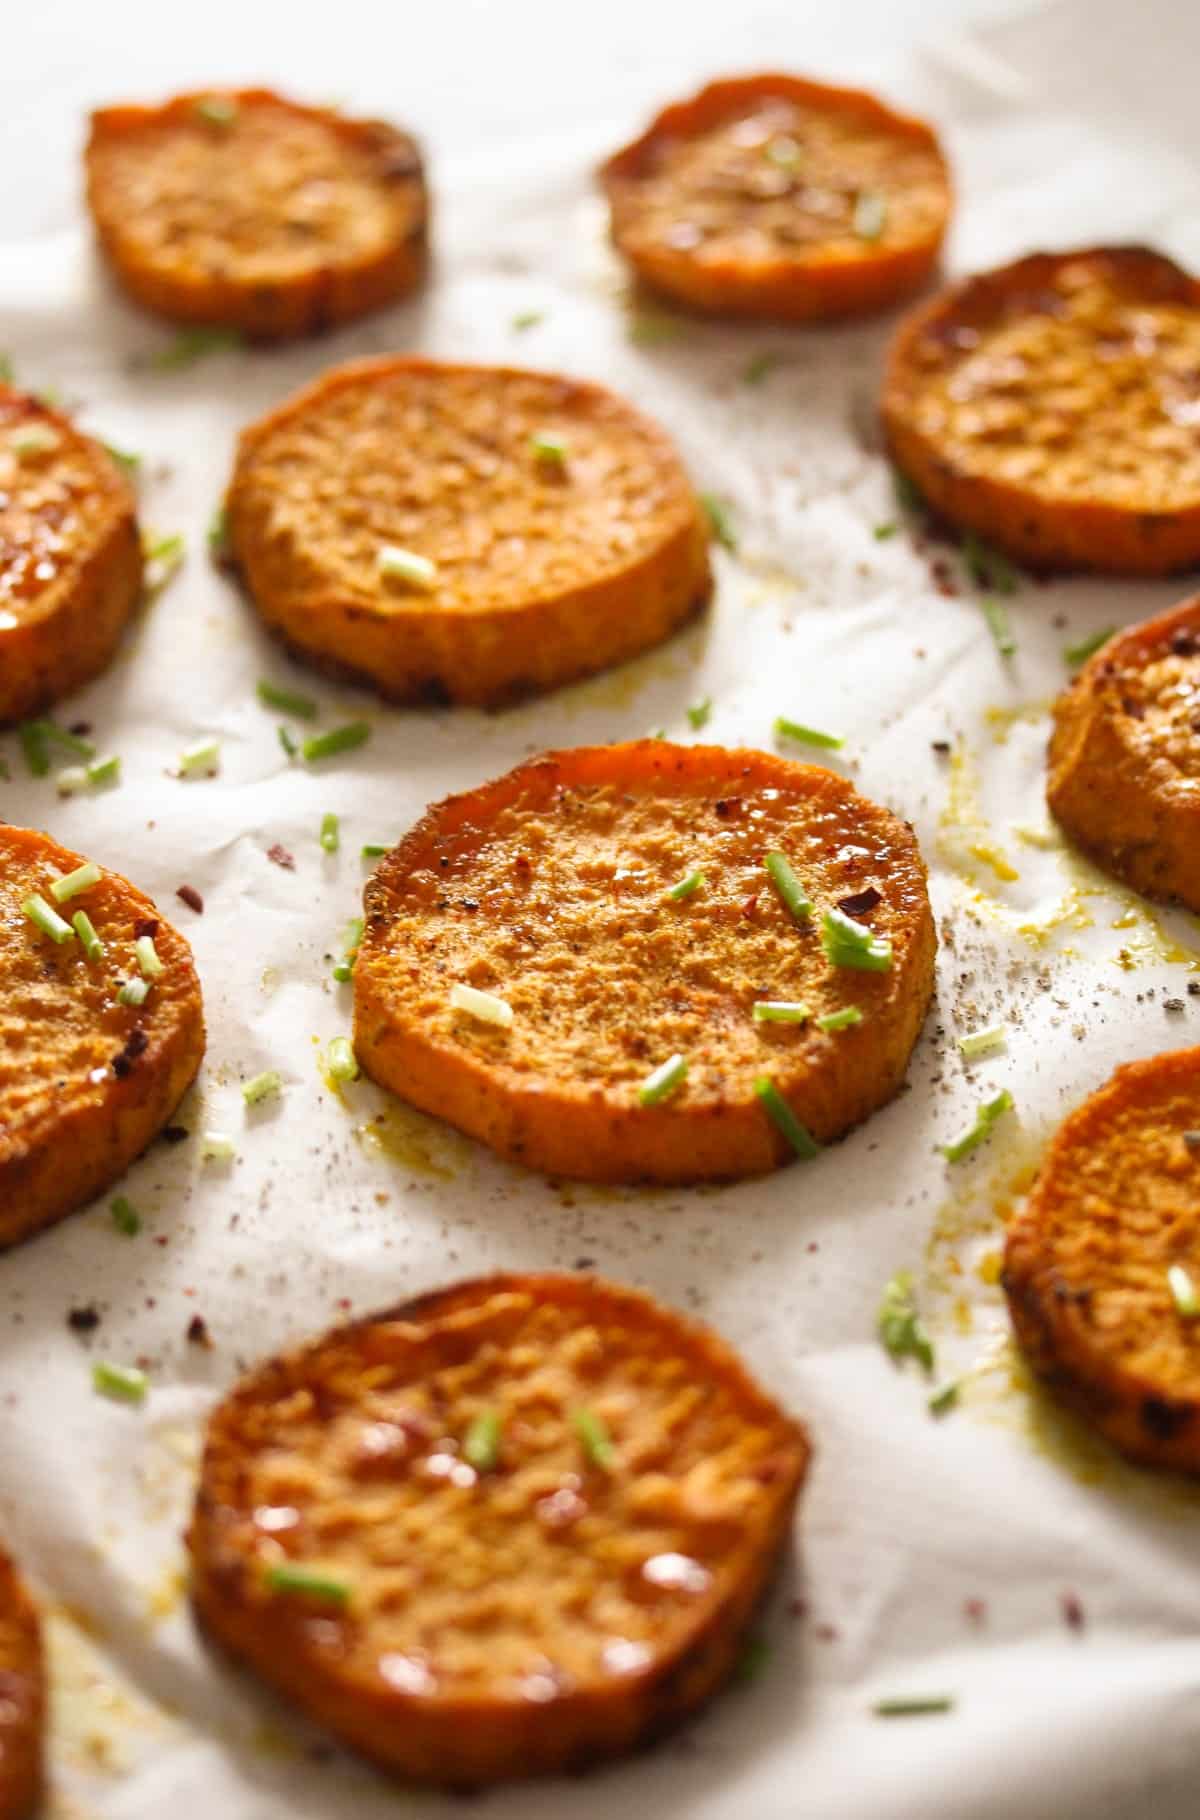 many roasted slices of sweet potatoes sprinkled with chives.